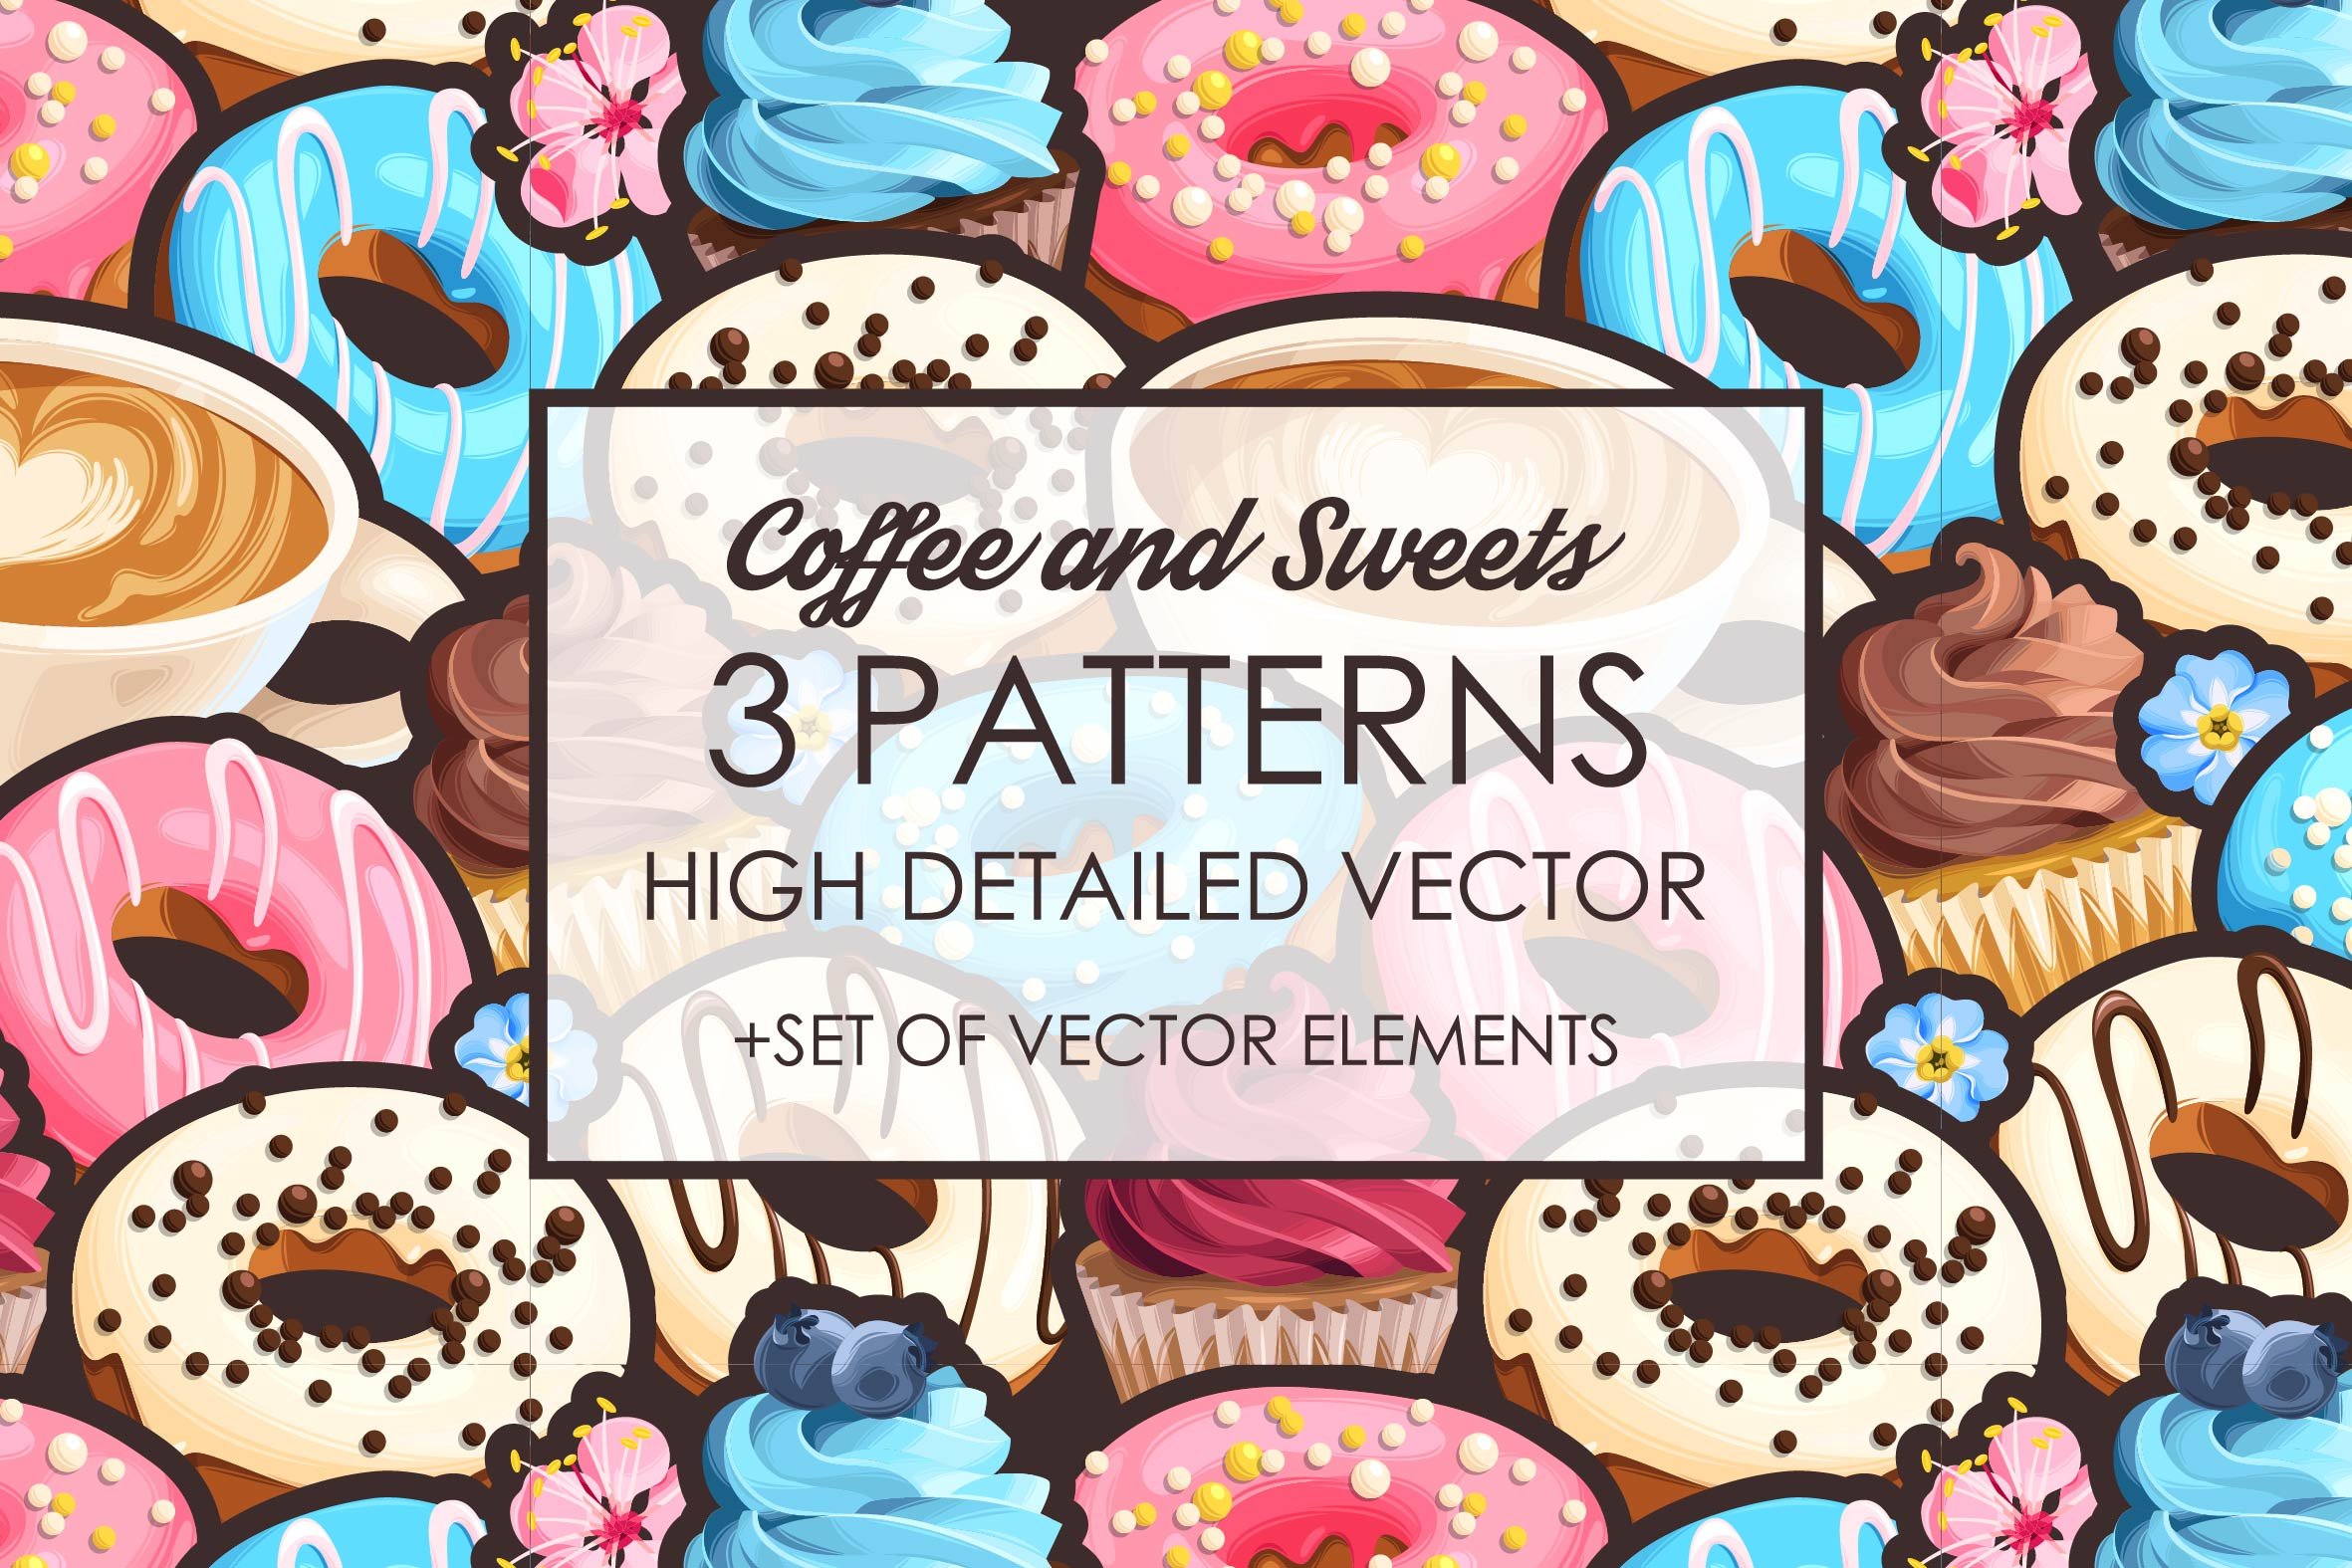 Coffee and Sweets Patterns cover image.